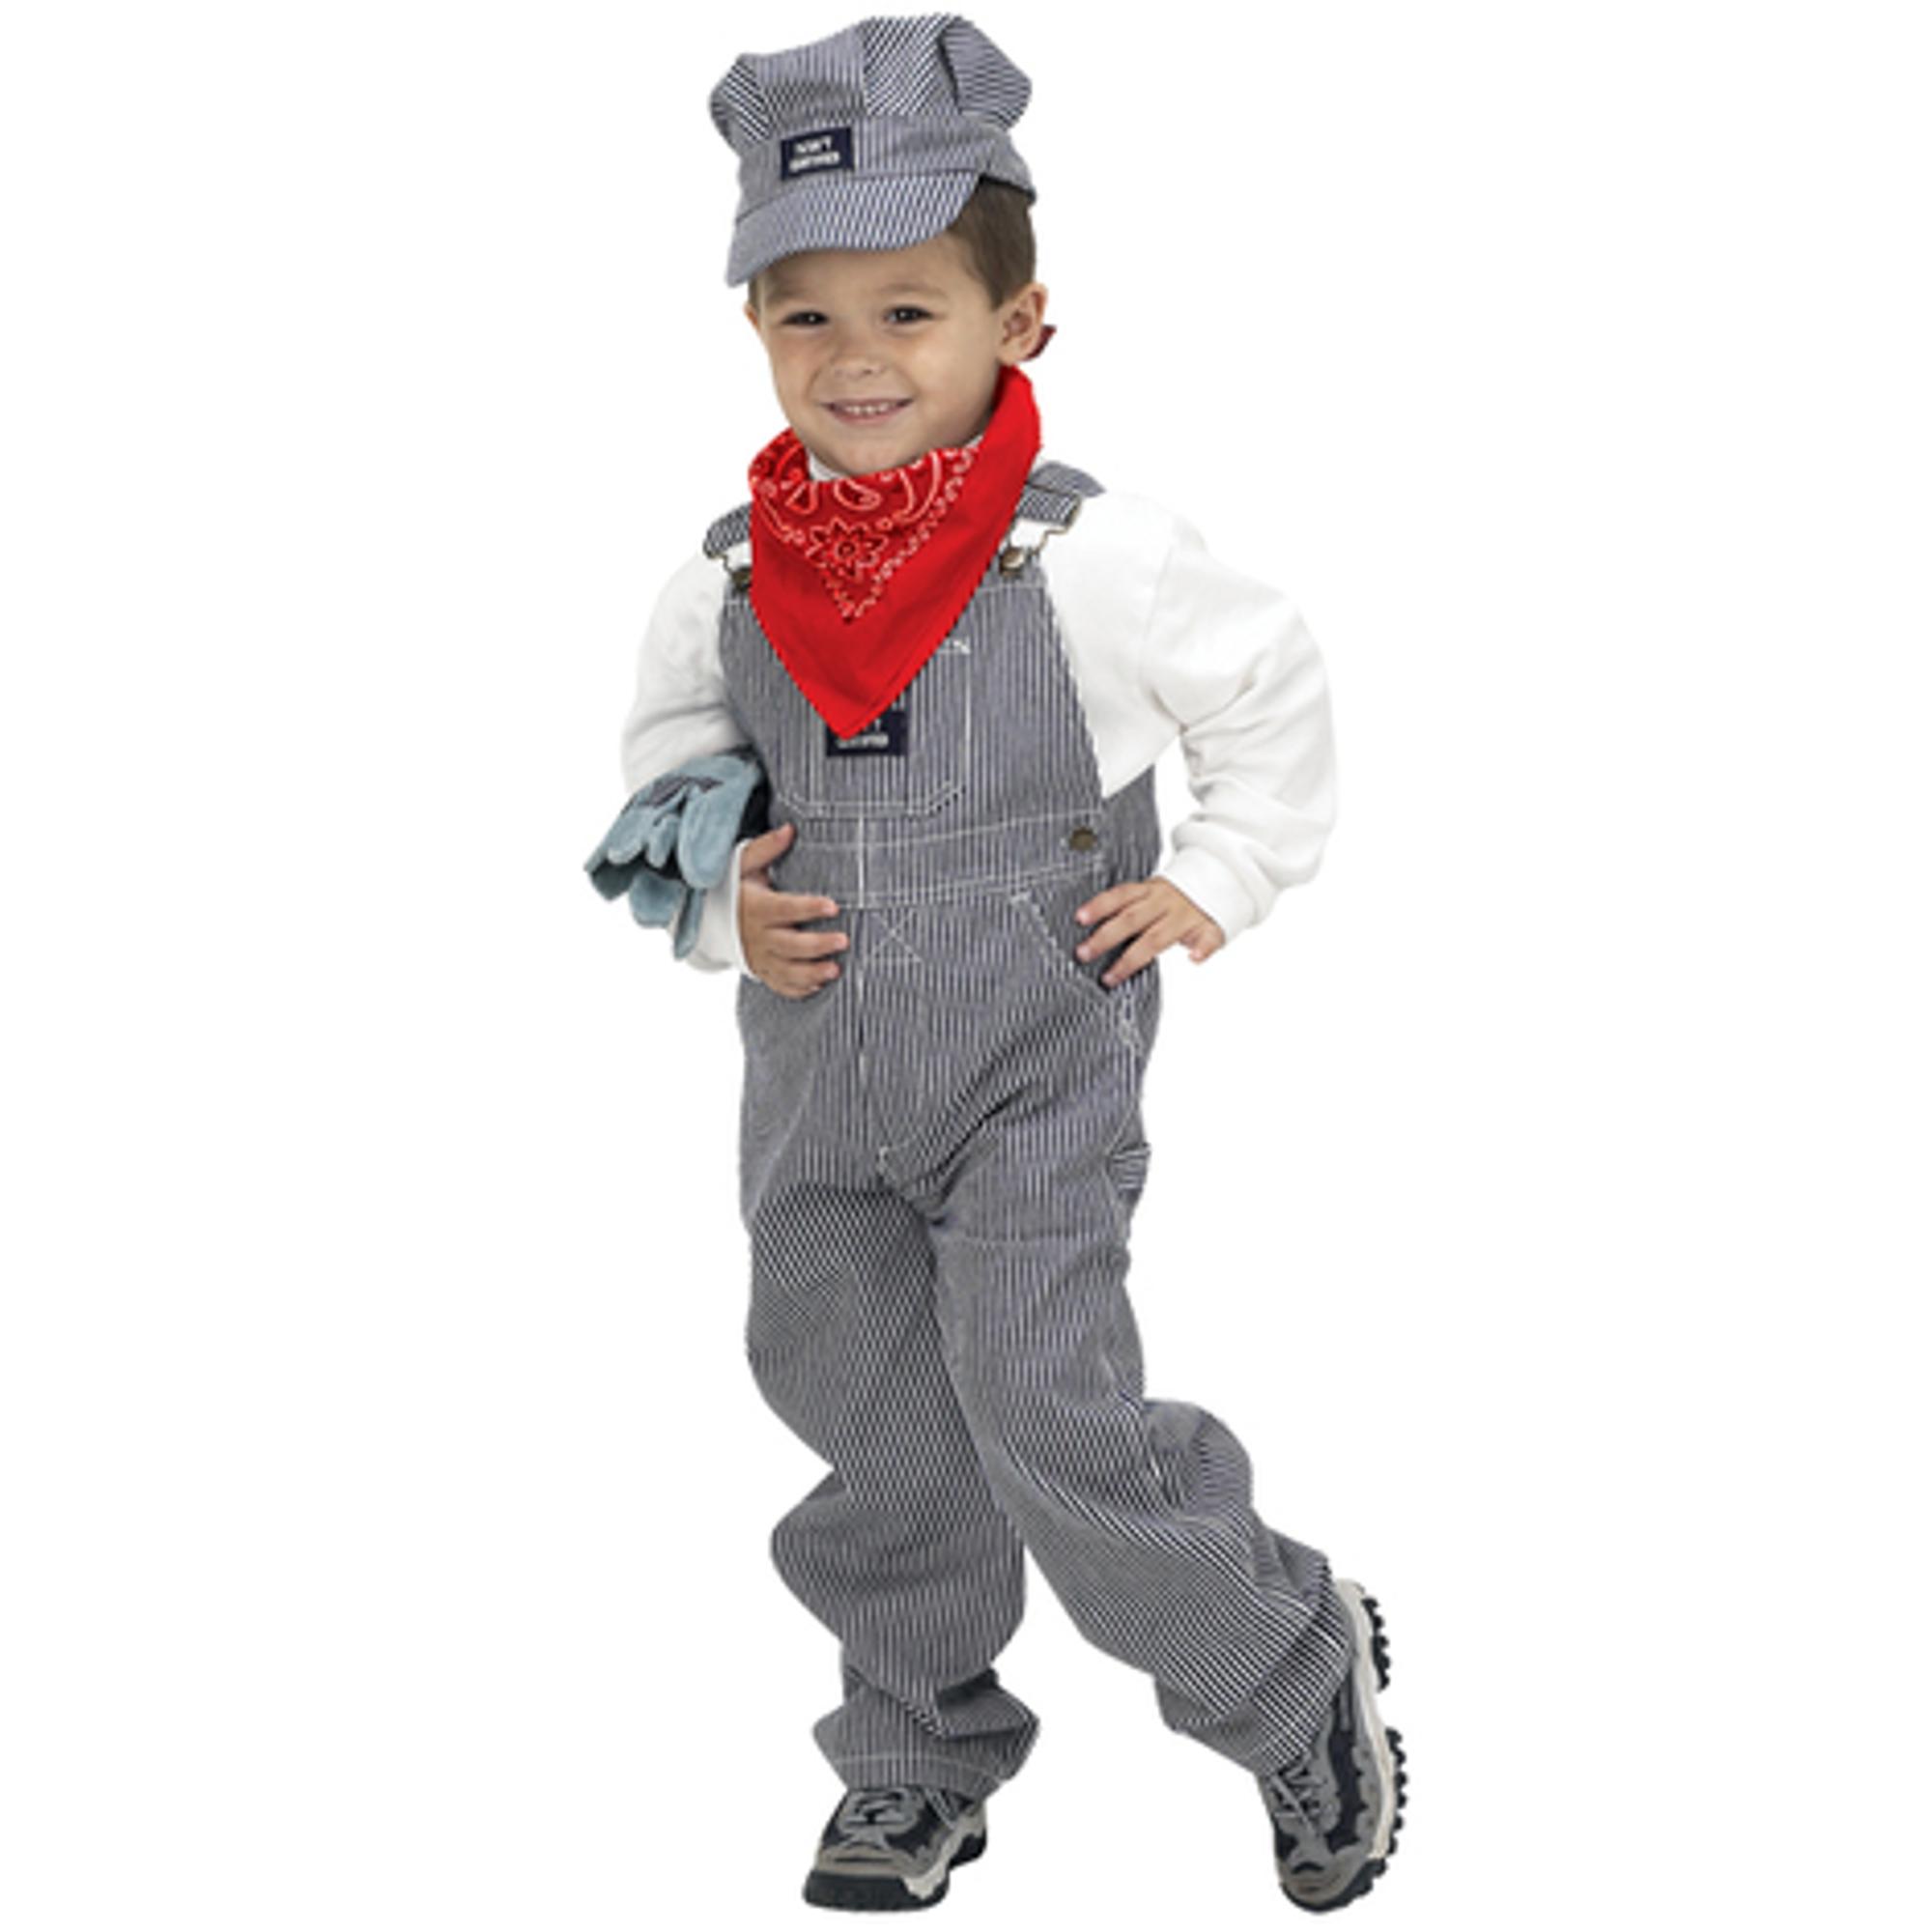 Train Engineer Suit (Childs)